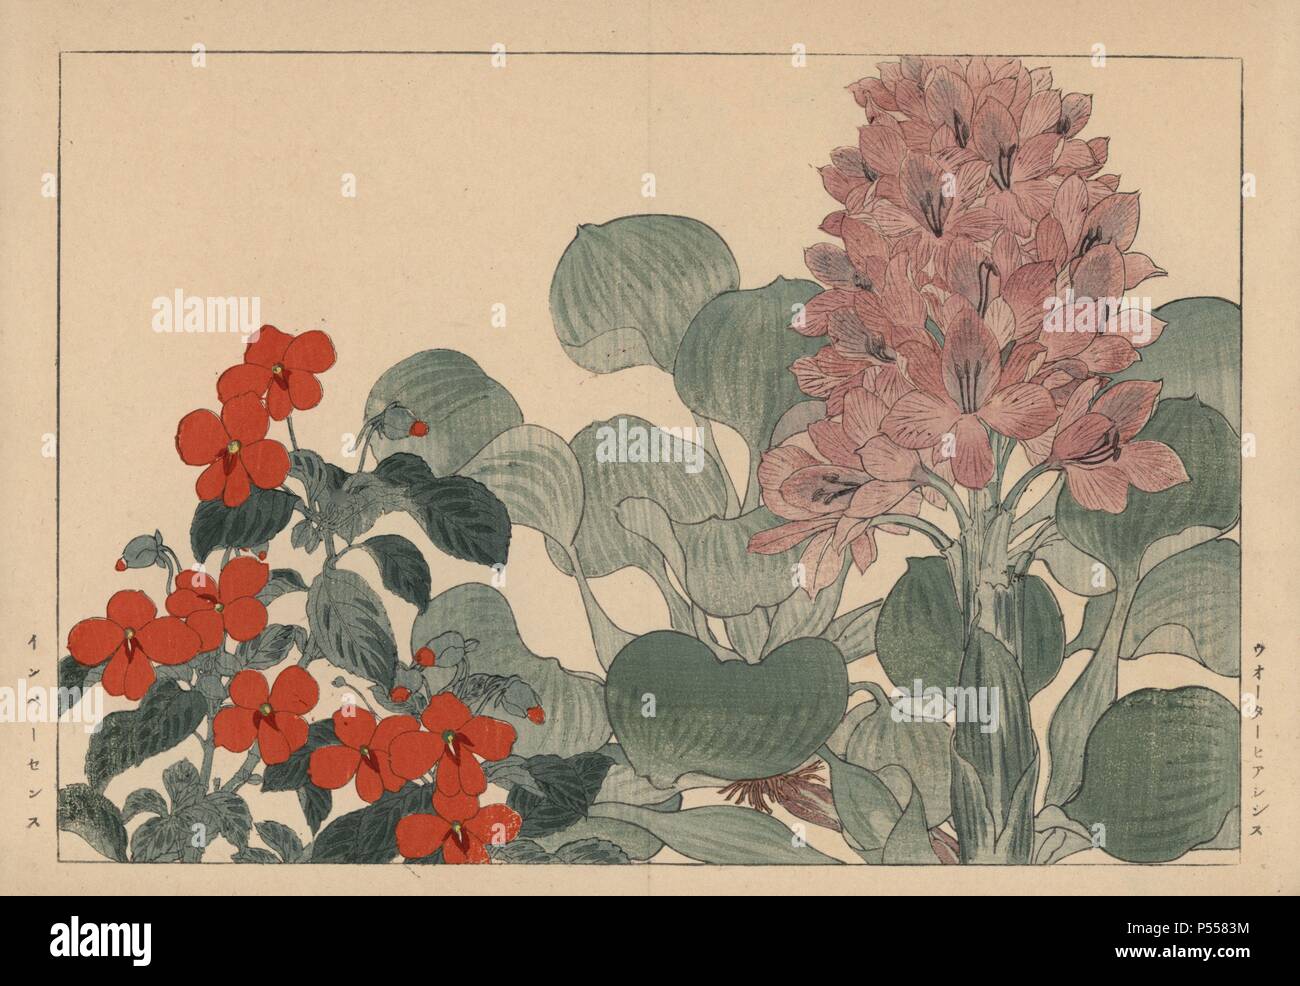 Water hyacinth, Eichhornia crassipes, and busy lizzy, Impatiens walleriana. Handcoloured woodblock print from Konan Tanigami's 'Seiyou Sokazufu' (Pictorial Album of Western Plants and Flowers: Summer), Unsodo, Kyoto, 1917. Tanigami (1879-1928) depicted 125 varieties of garden plants through the four seasons. Stock Photo